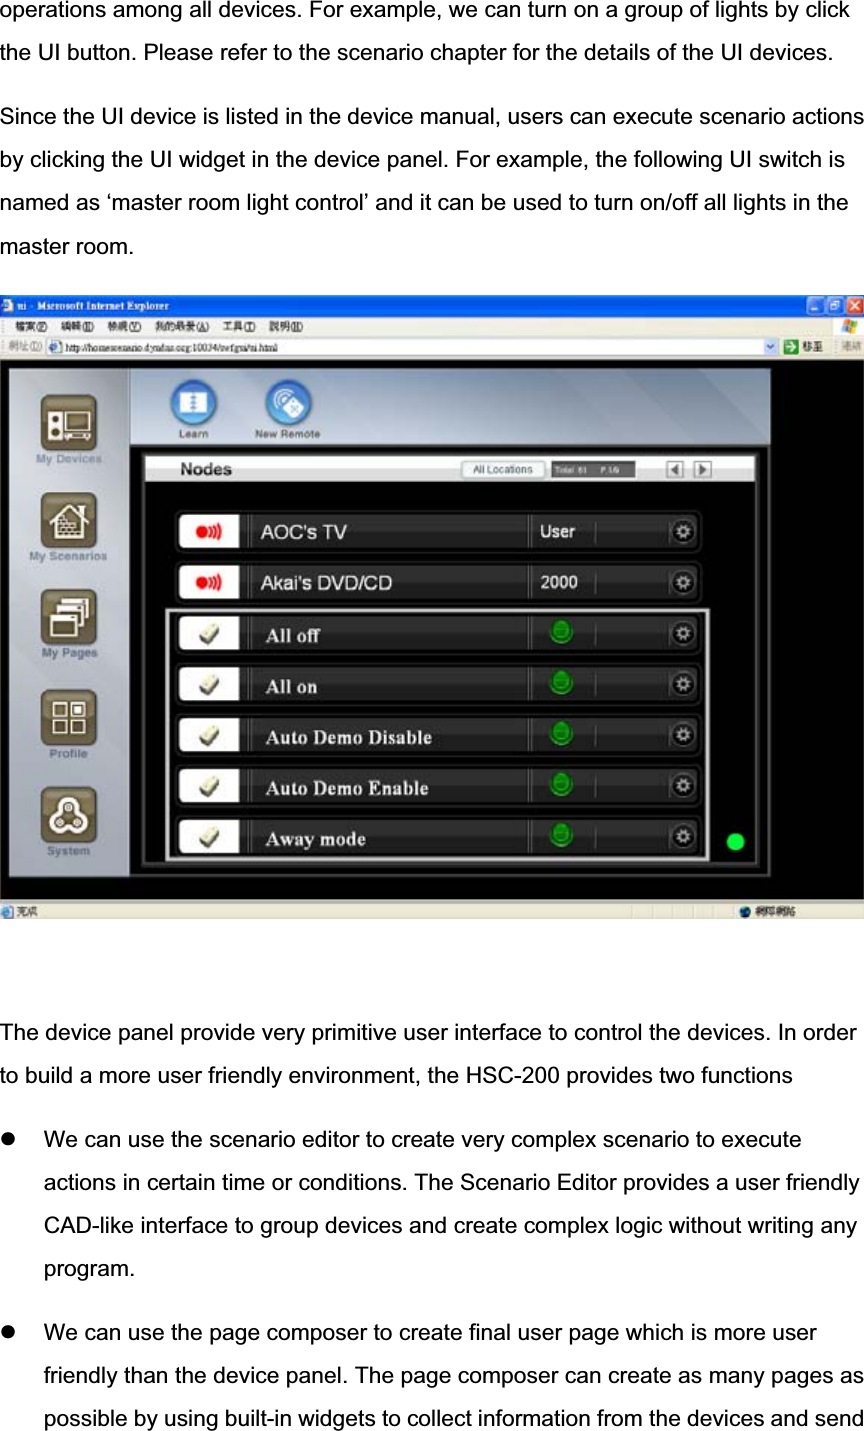 operations among all devices. For example, we can turn on a group of lights by click the UI button. Please refer to the scenario chapter for the details of the UI devices. Since the UI device is listed in the device manual, users can execute scenario actionsby clicking the UI widget in the device panel. For example, the following UI switch is named as ‘master room light control’ and it can be used to turn on/off all lights in themaster room. The device panel provide very primitive user interface to control the devices. In order to build a more user friendly environment, the HSC-200 provides two functions z We can use the scenario editor to create very complex scenario to execute actions in certain time or conditions. The Scenario Editor provides a user friendly CAD-like interface to group devices and create complex logic without writing any program.z We can use the page composer to create final user page which is more userfriendly than the device panel. The page composer can create as many pages as possible by using built-in widgets to collect information from the devices and send